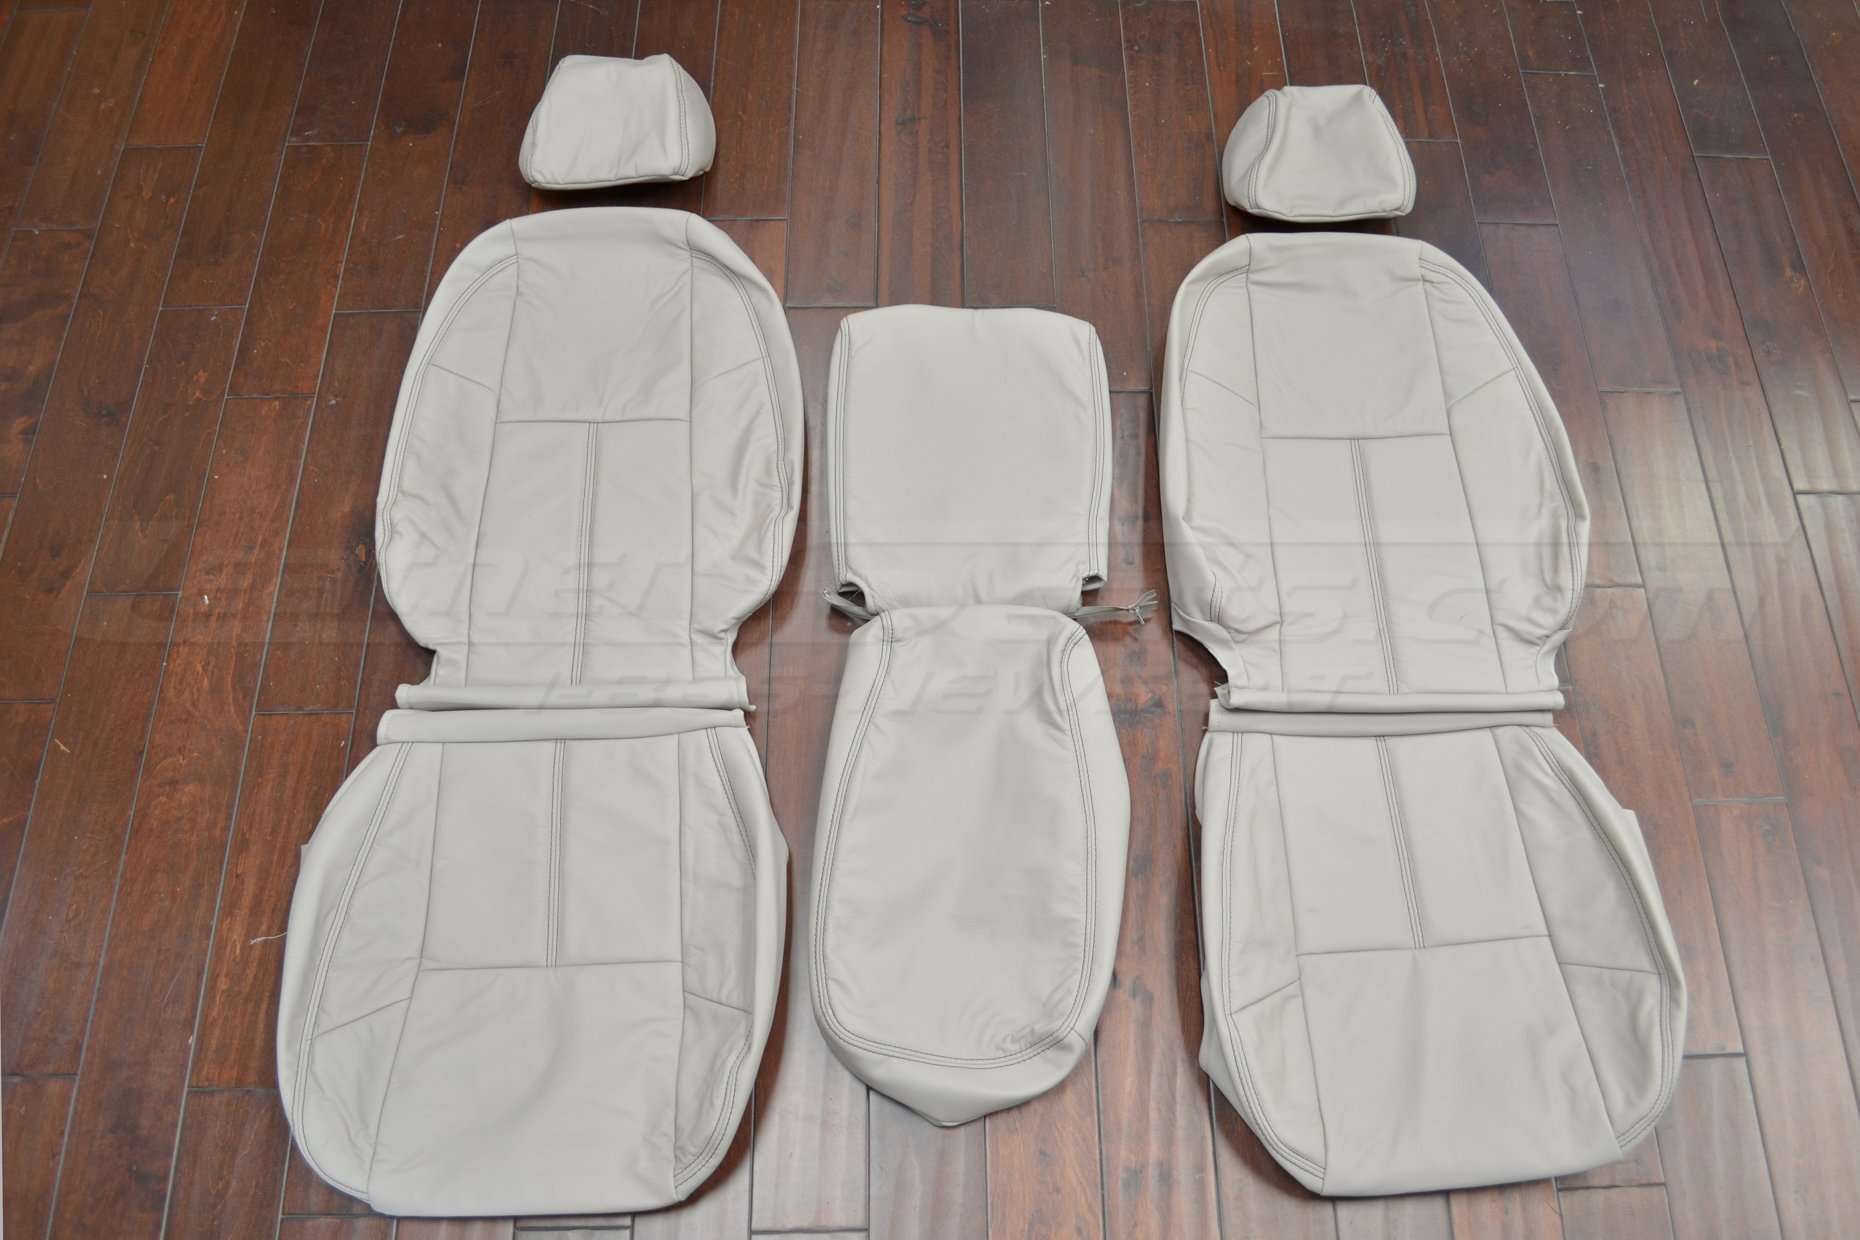 2003-2007 Chevrolet Silverado Leather Upholstery Kit- Dove Grey- Front seats with console